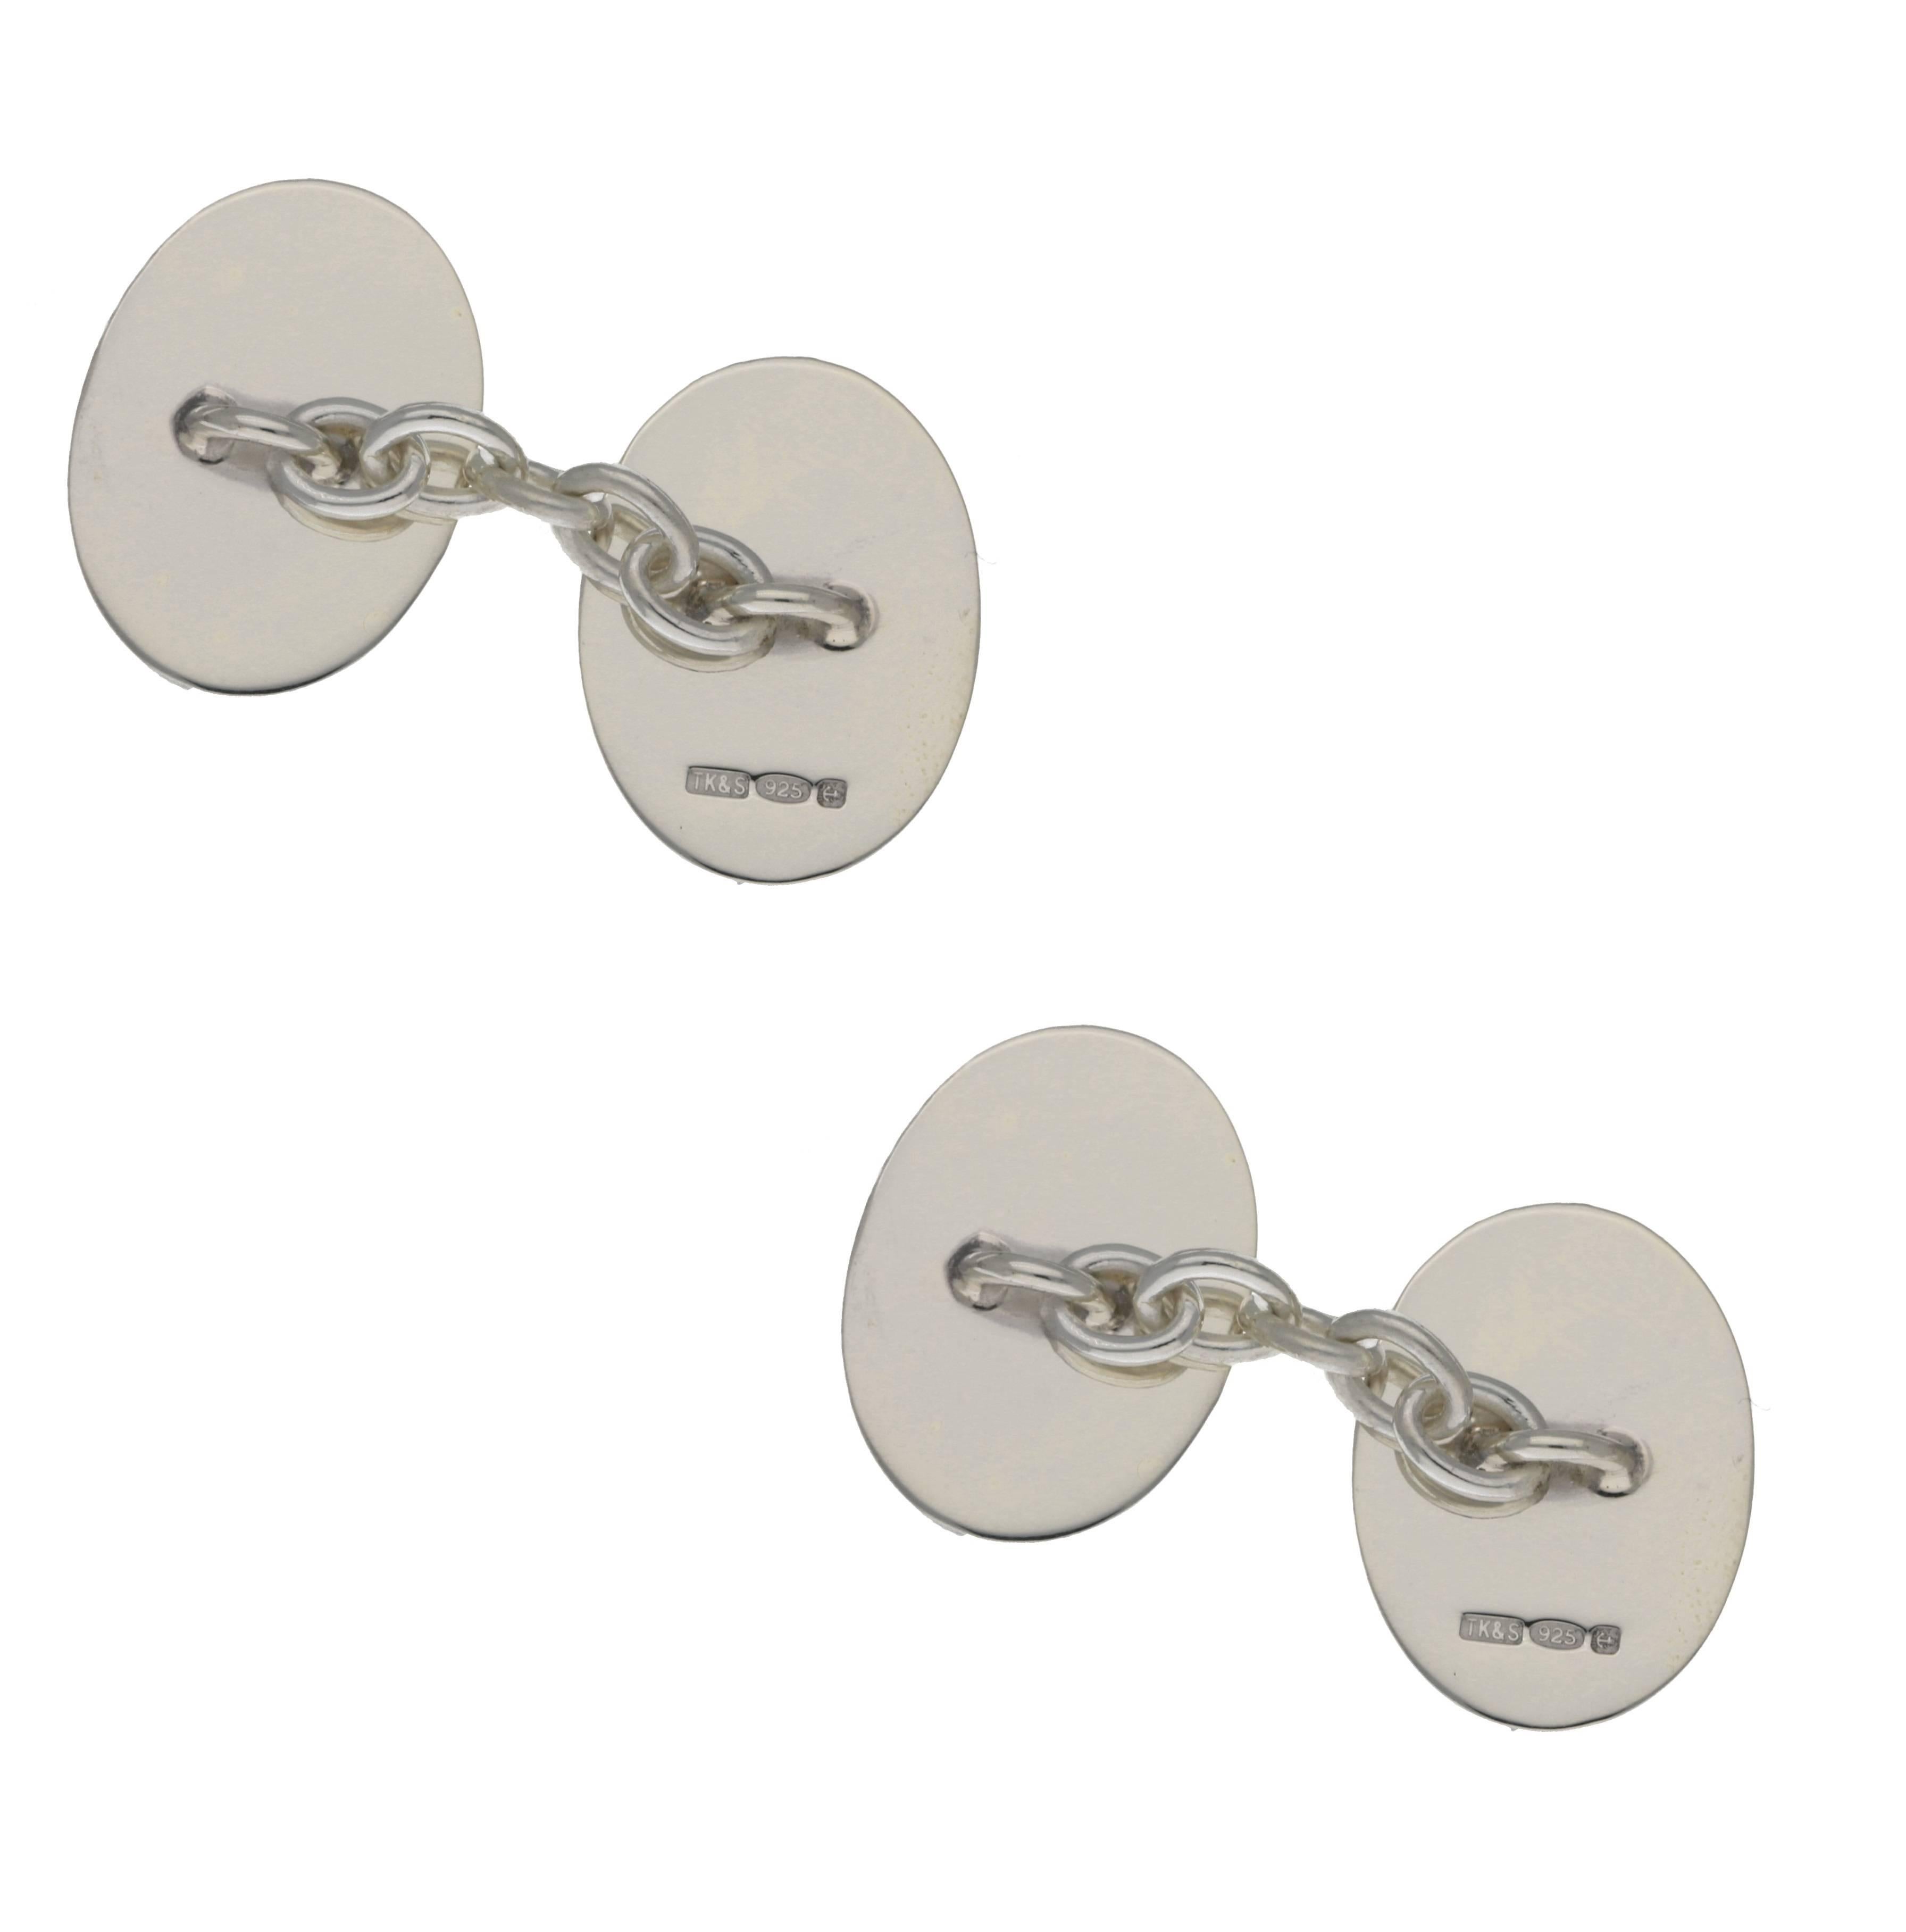 A smart pair of British sterling 925 silver cufflinks. With stunning enamel detail in the form of an eagles head. On classic five link chain fittings. These come in a beautiful Susannah Lovis presentation box for gifting.